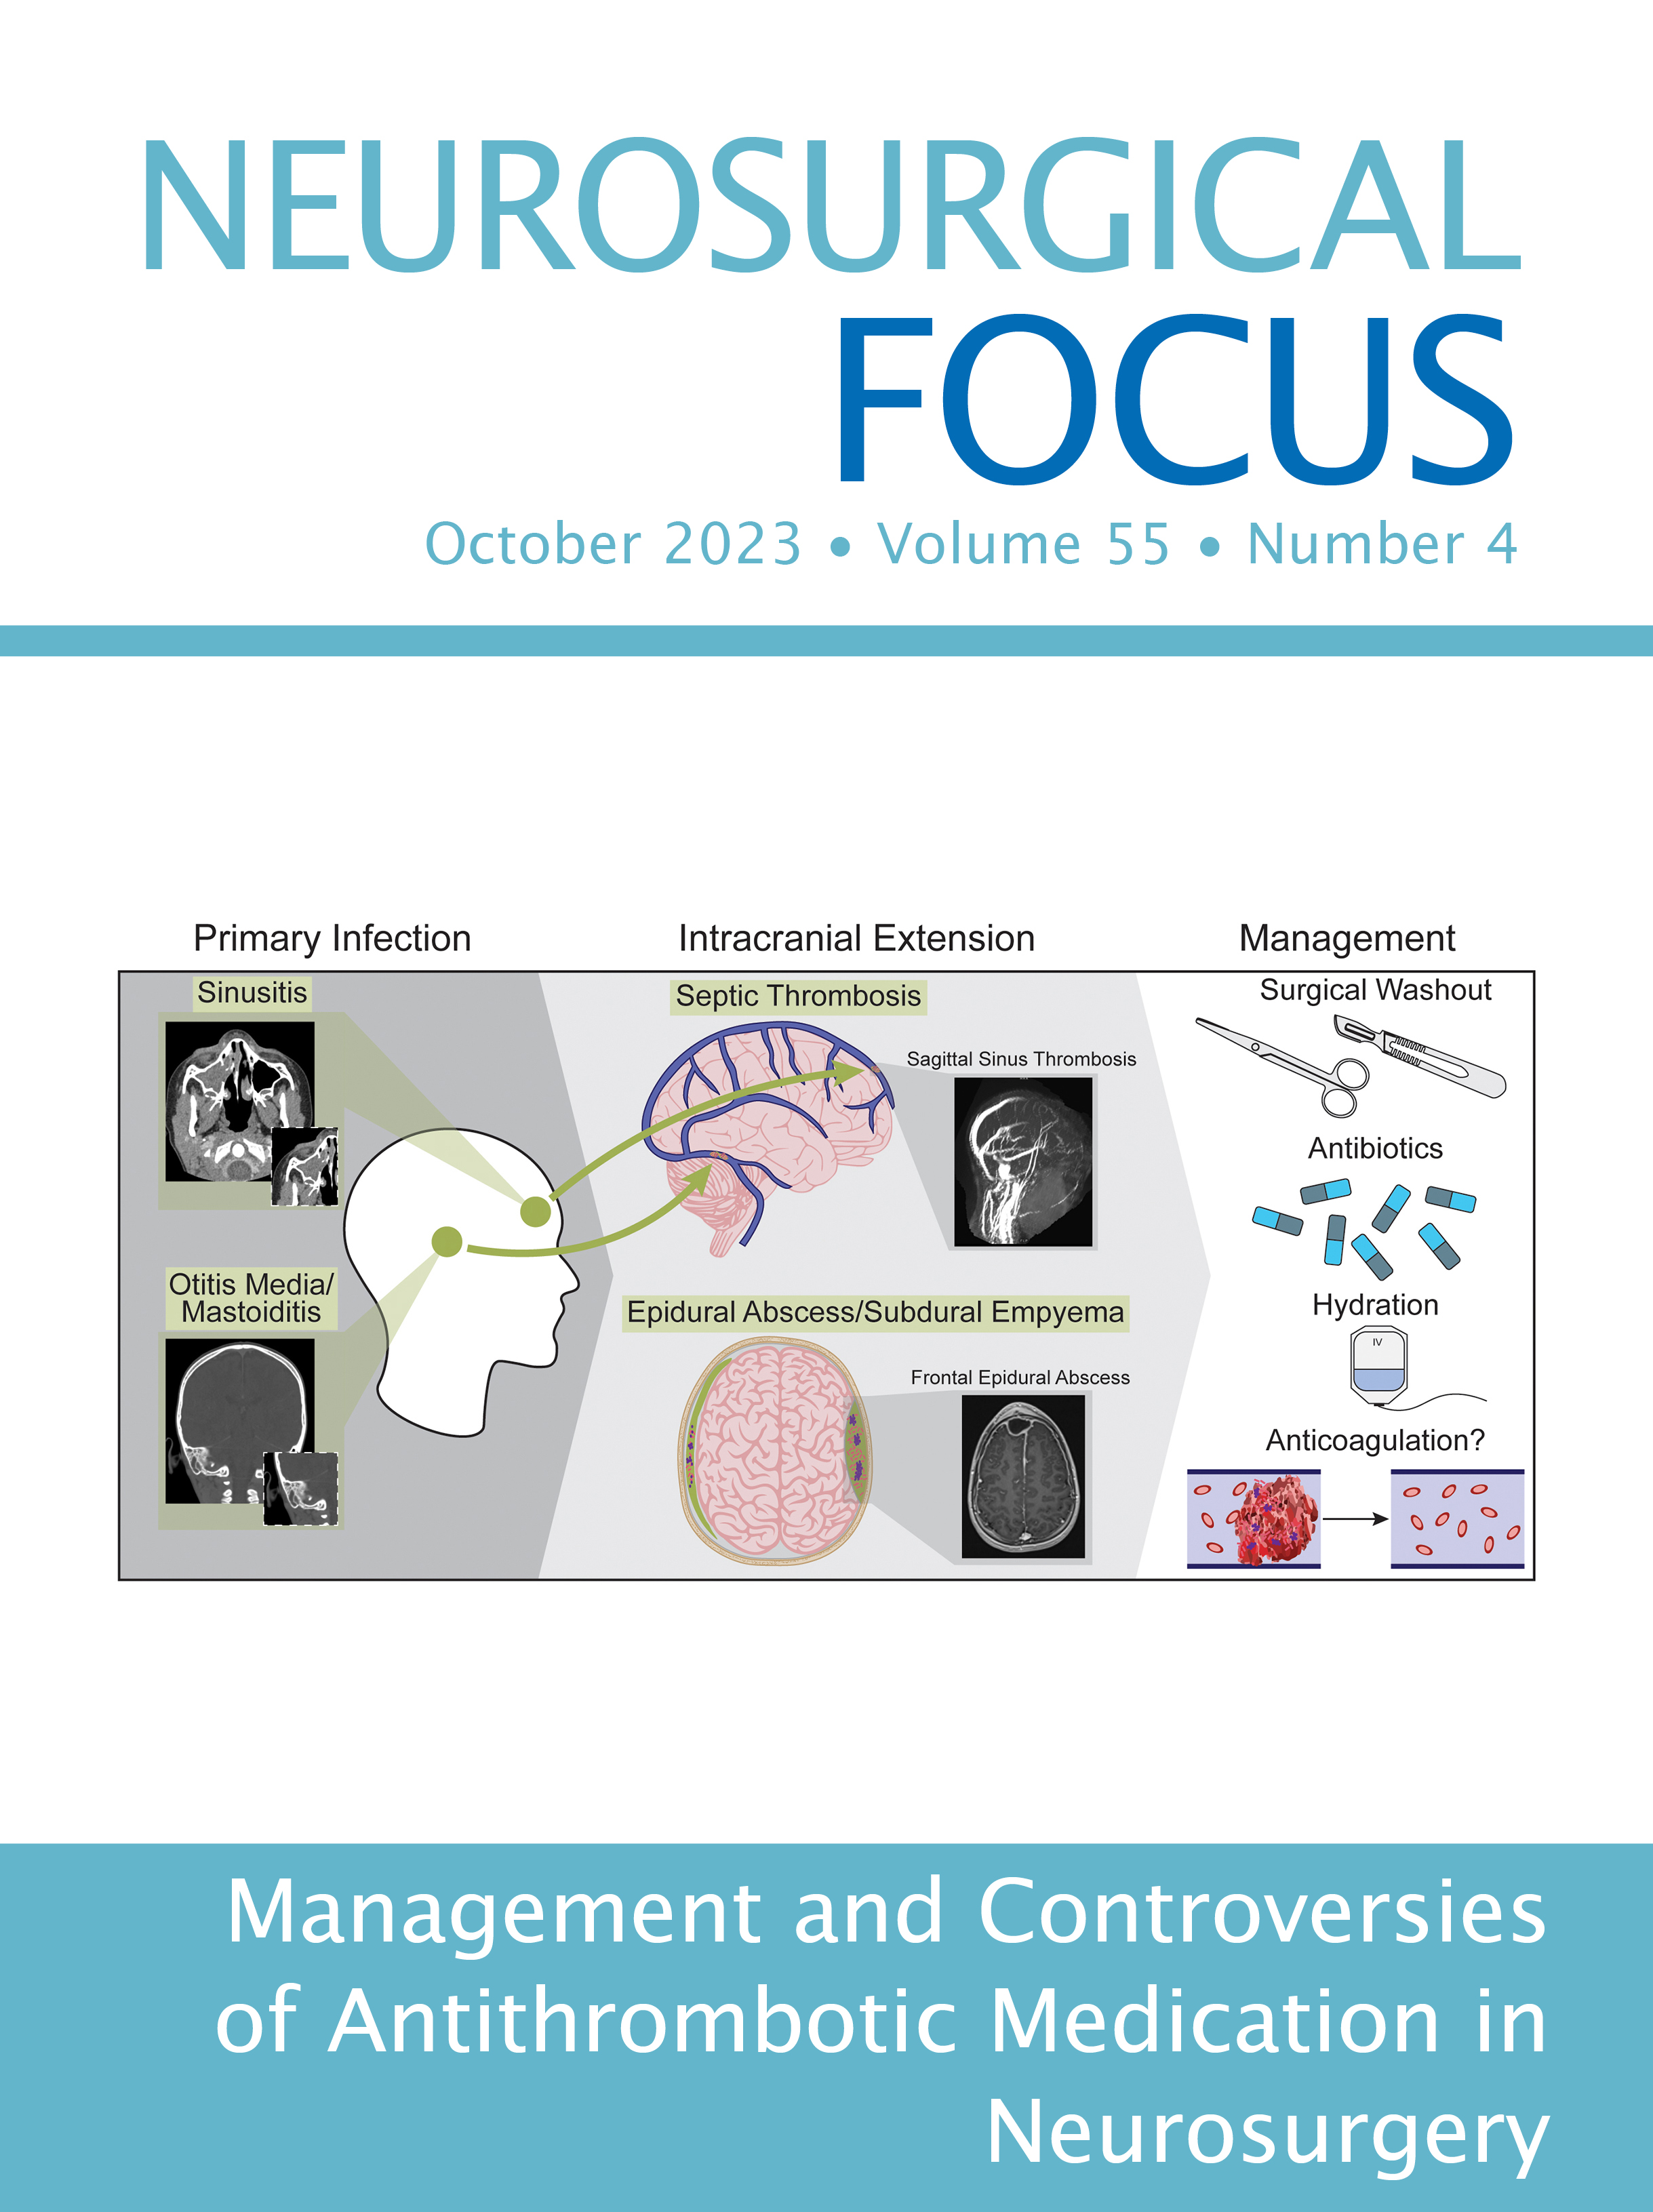 Volume 55: Issue 4 (October 2023): Management and Controversies of Antithrombotic Medication in Neurosurgery